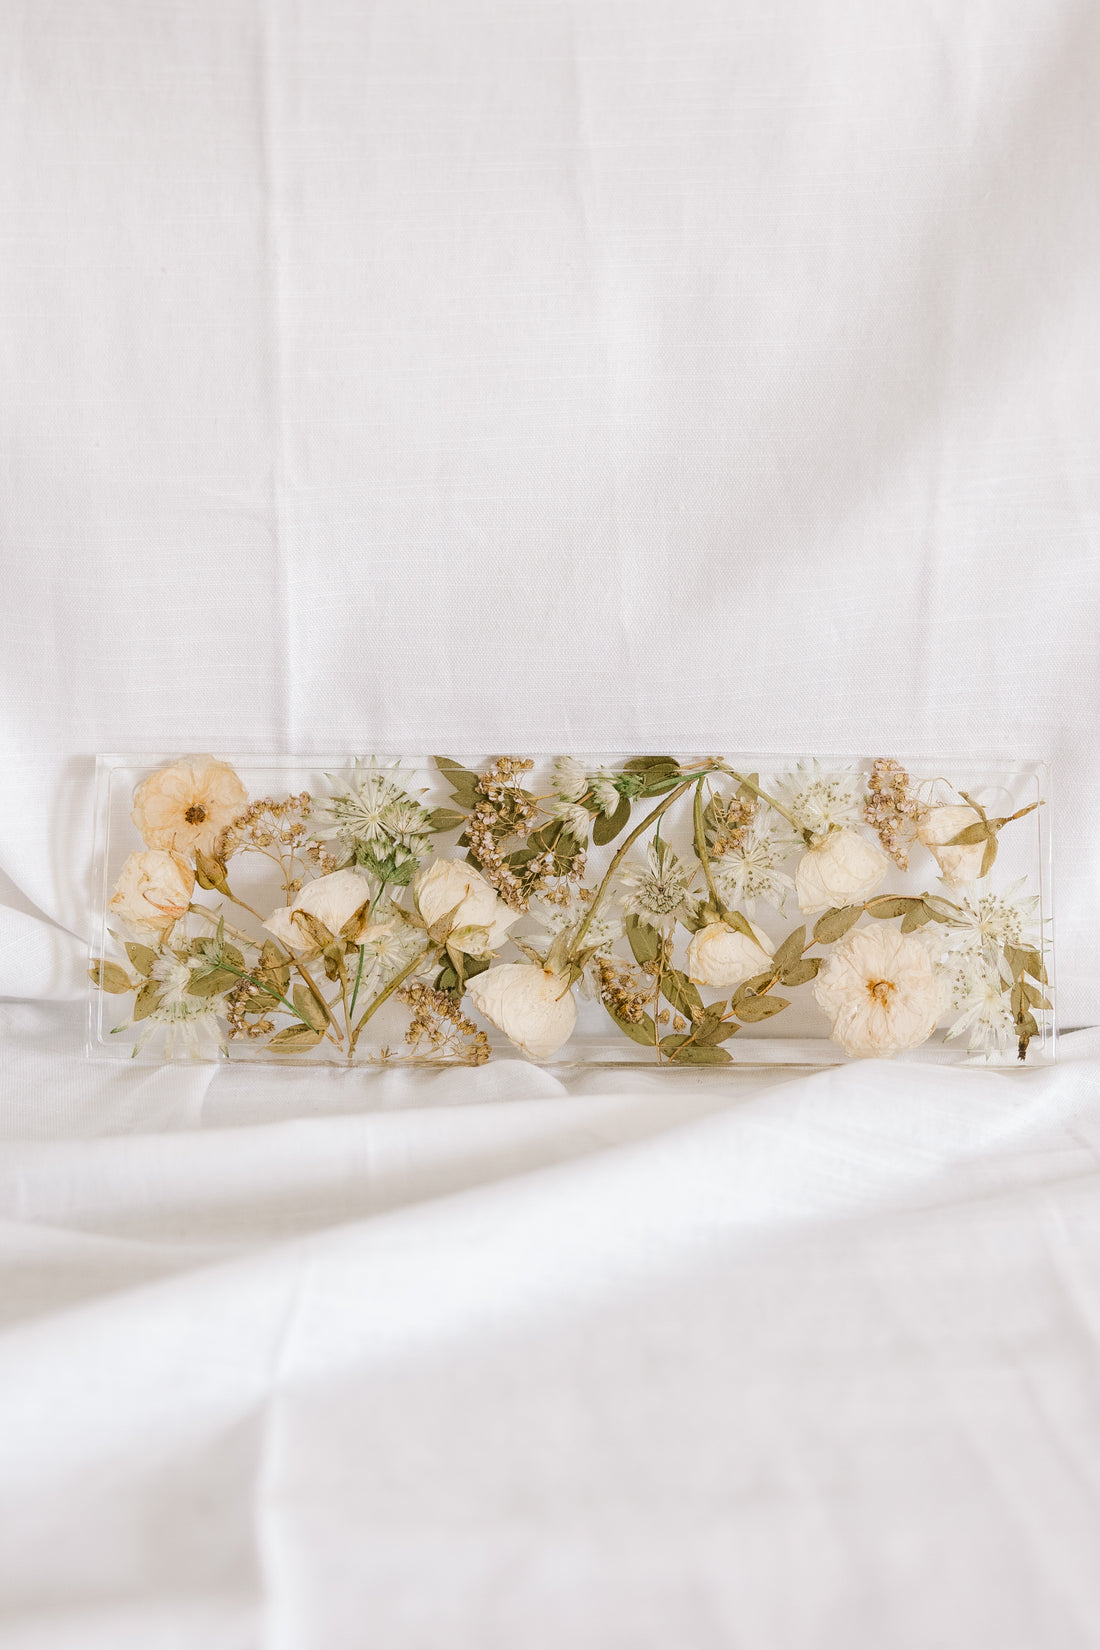 White and green wedding flowers fill a 13x4 inch display tray made out of resin by the Pressed Bouquet Shop.